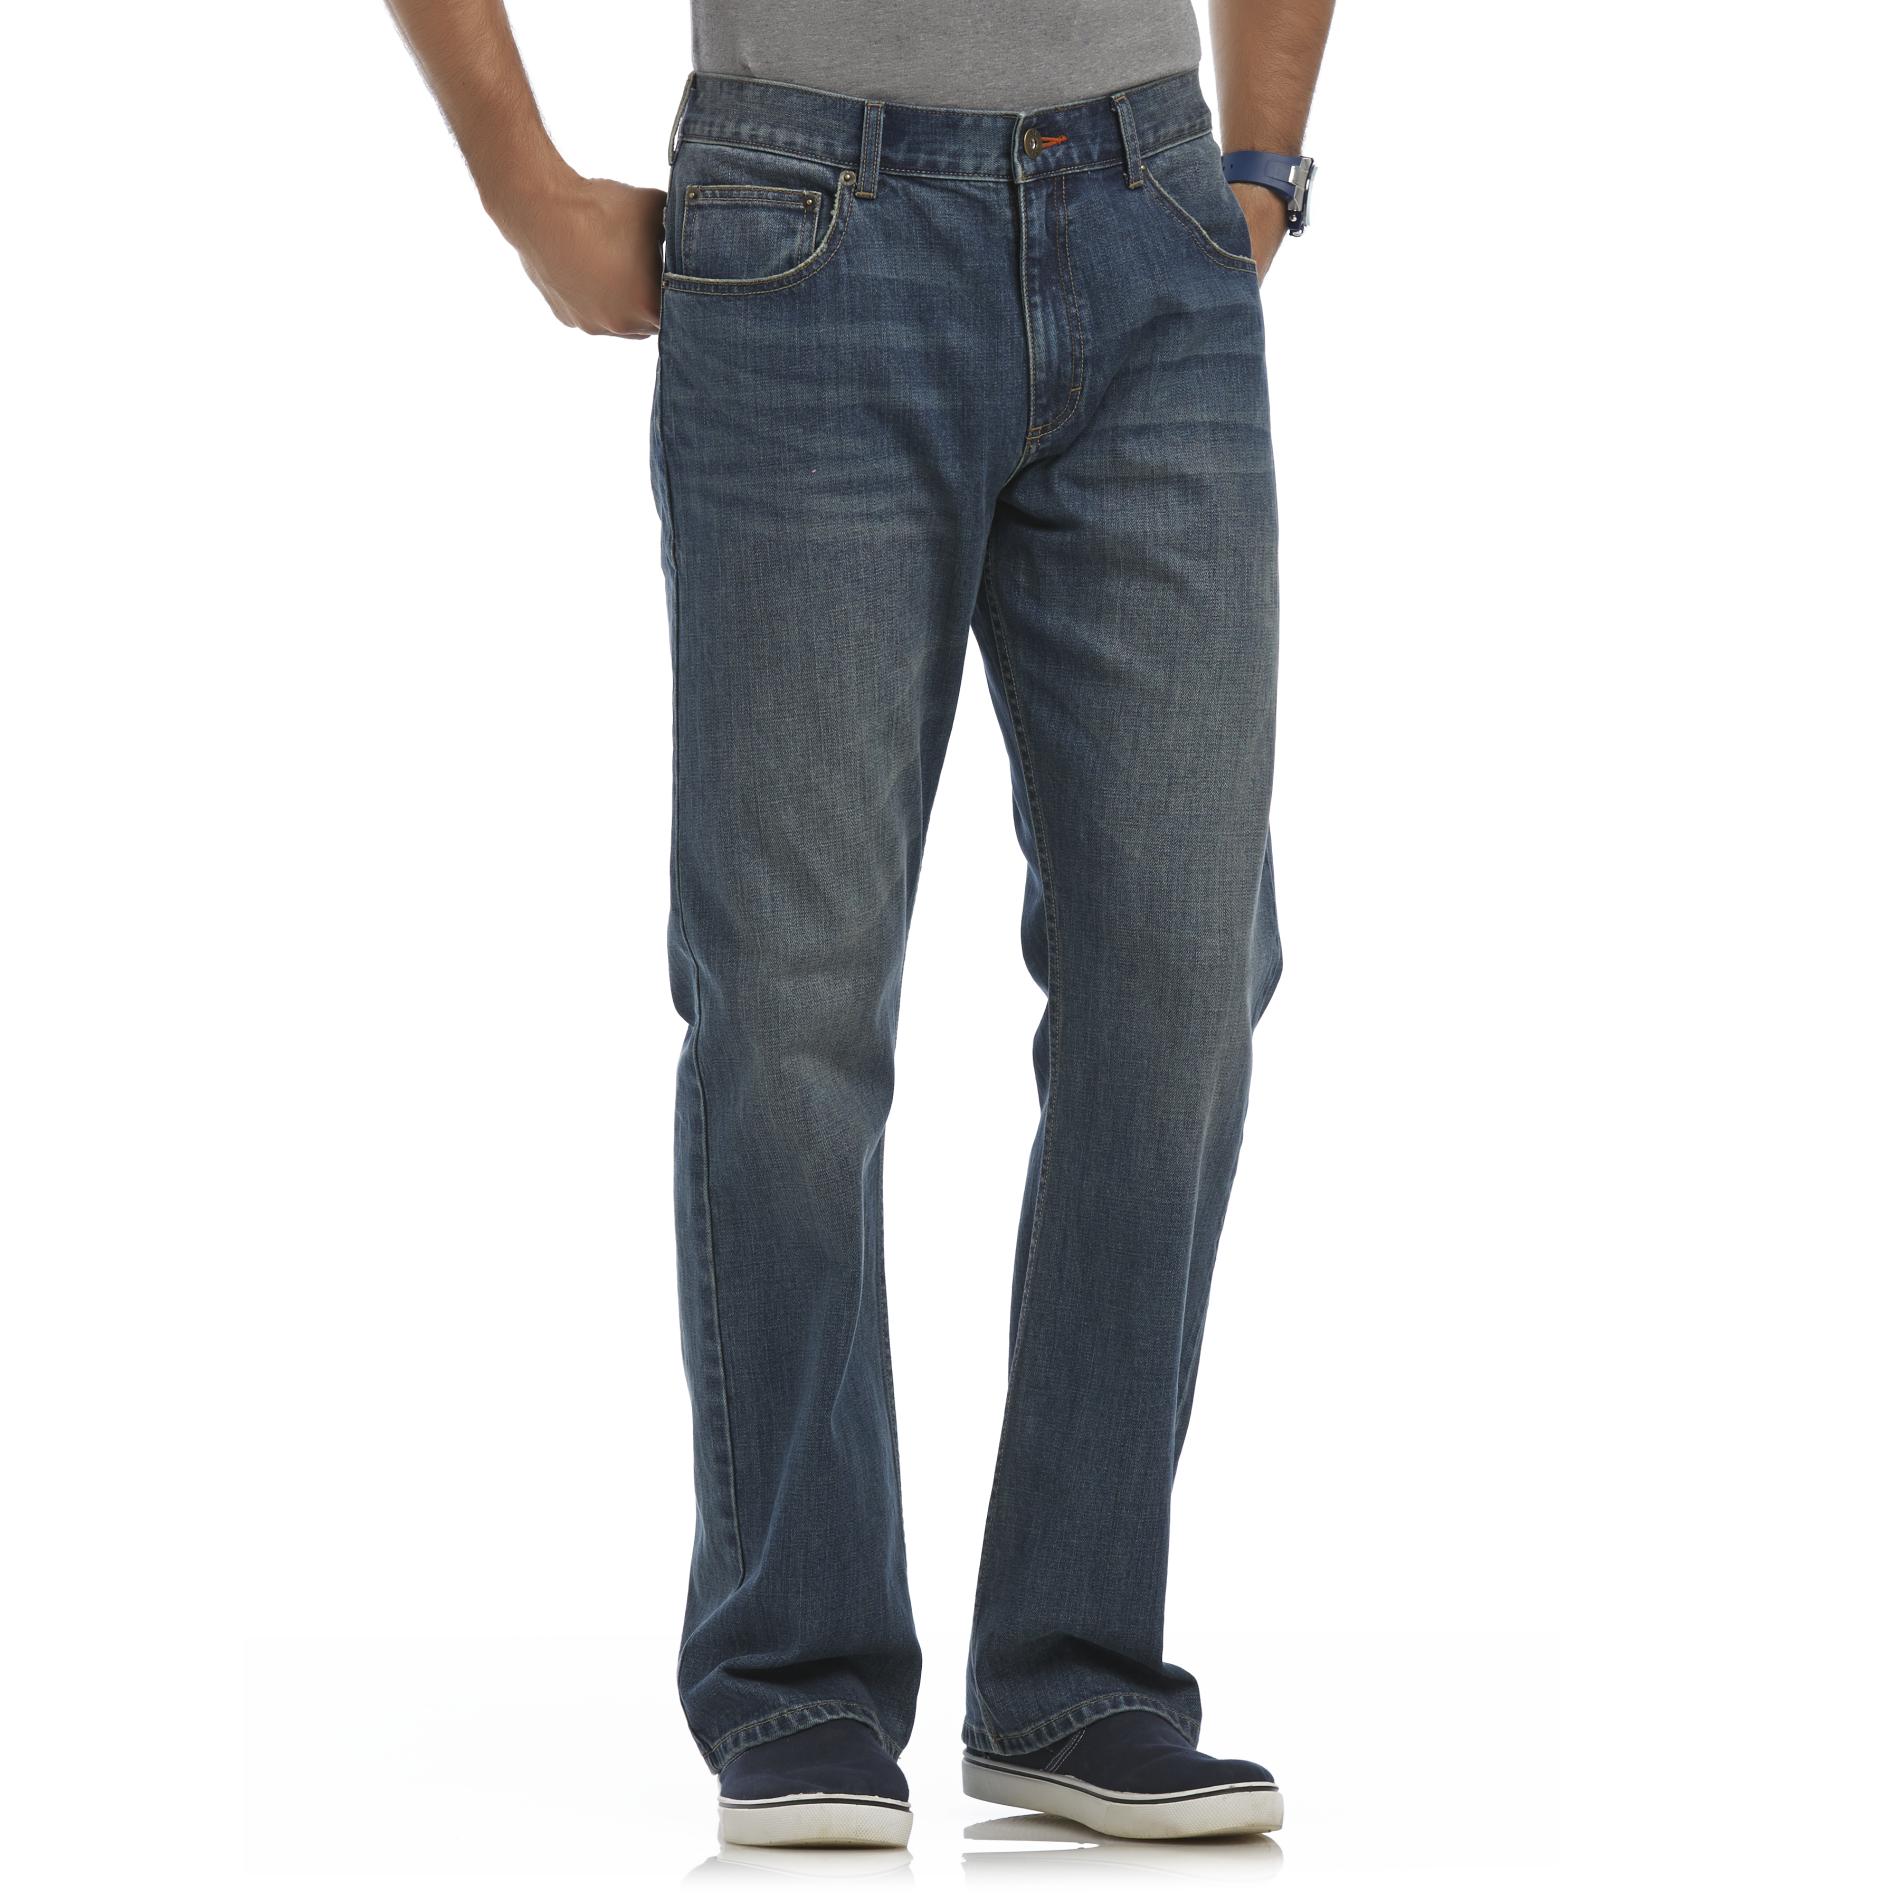 UPC 040326731516 - LEE Men's Modern Series L653 Relaxed Fit Bootcut ...